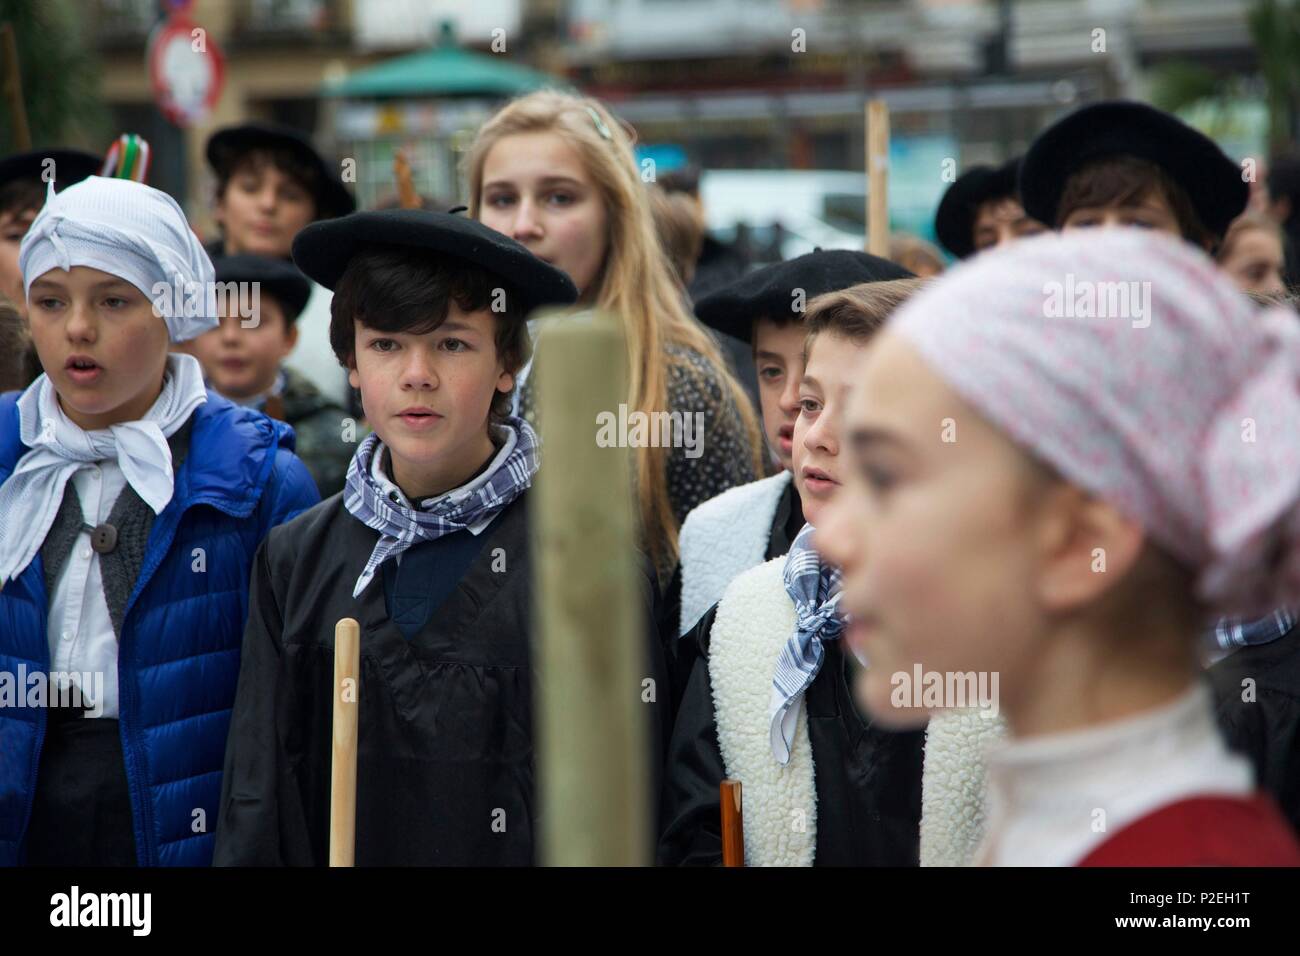 Spain, Basque country, San Sebastian, Children in traditional costumes during a religious festival Stock Photo